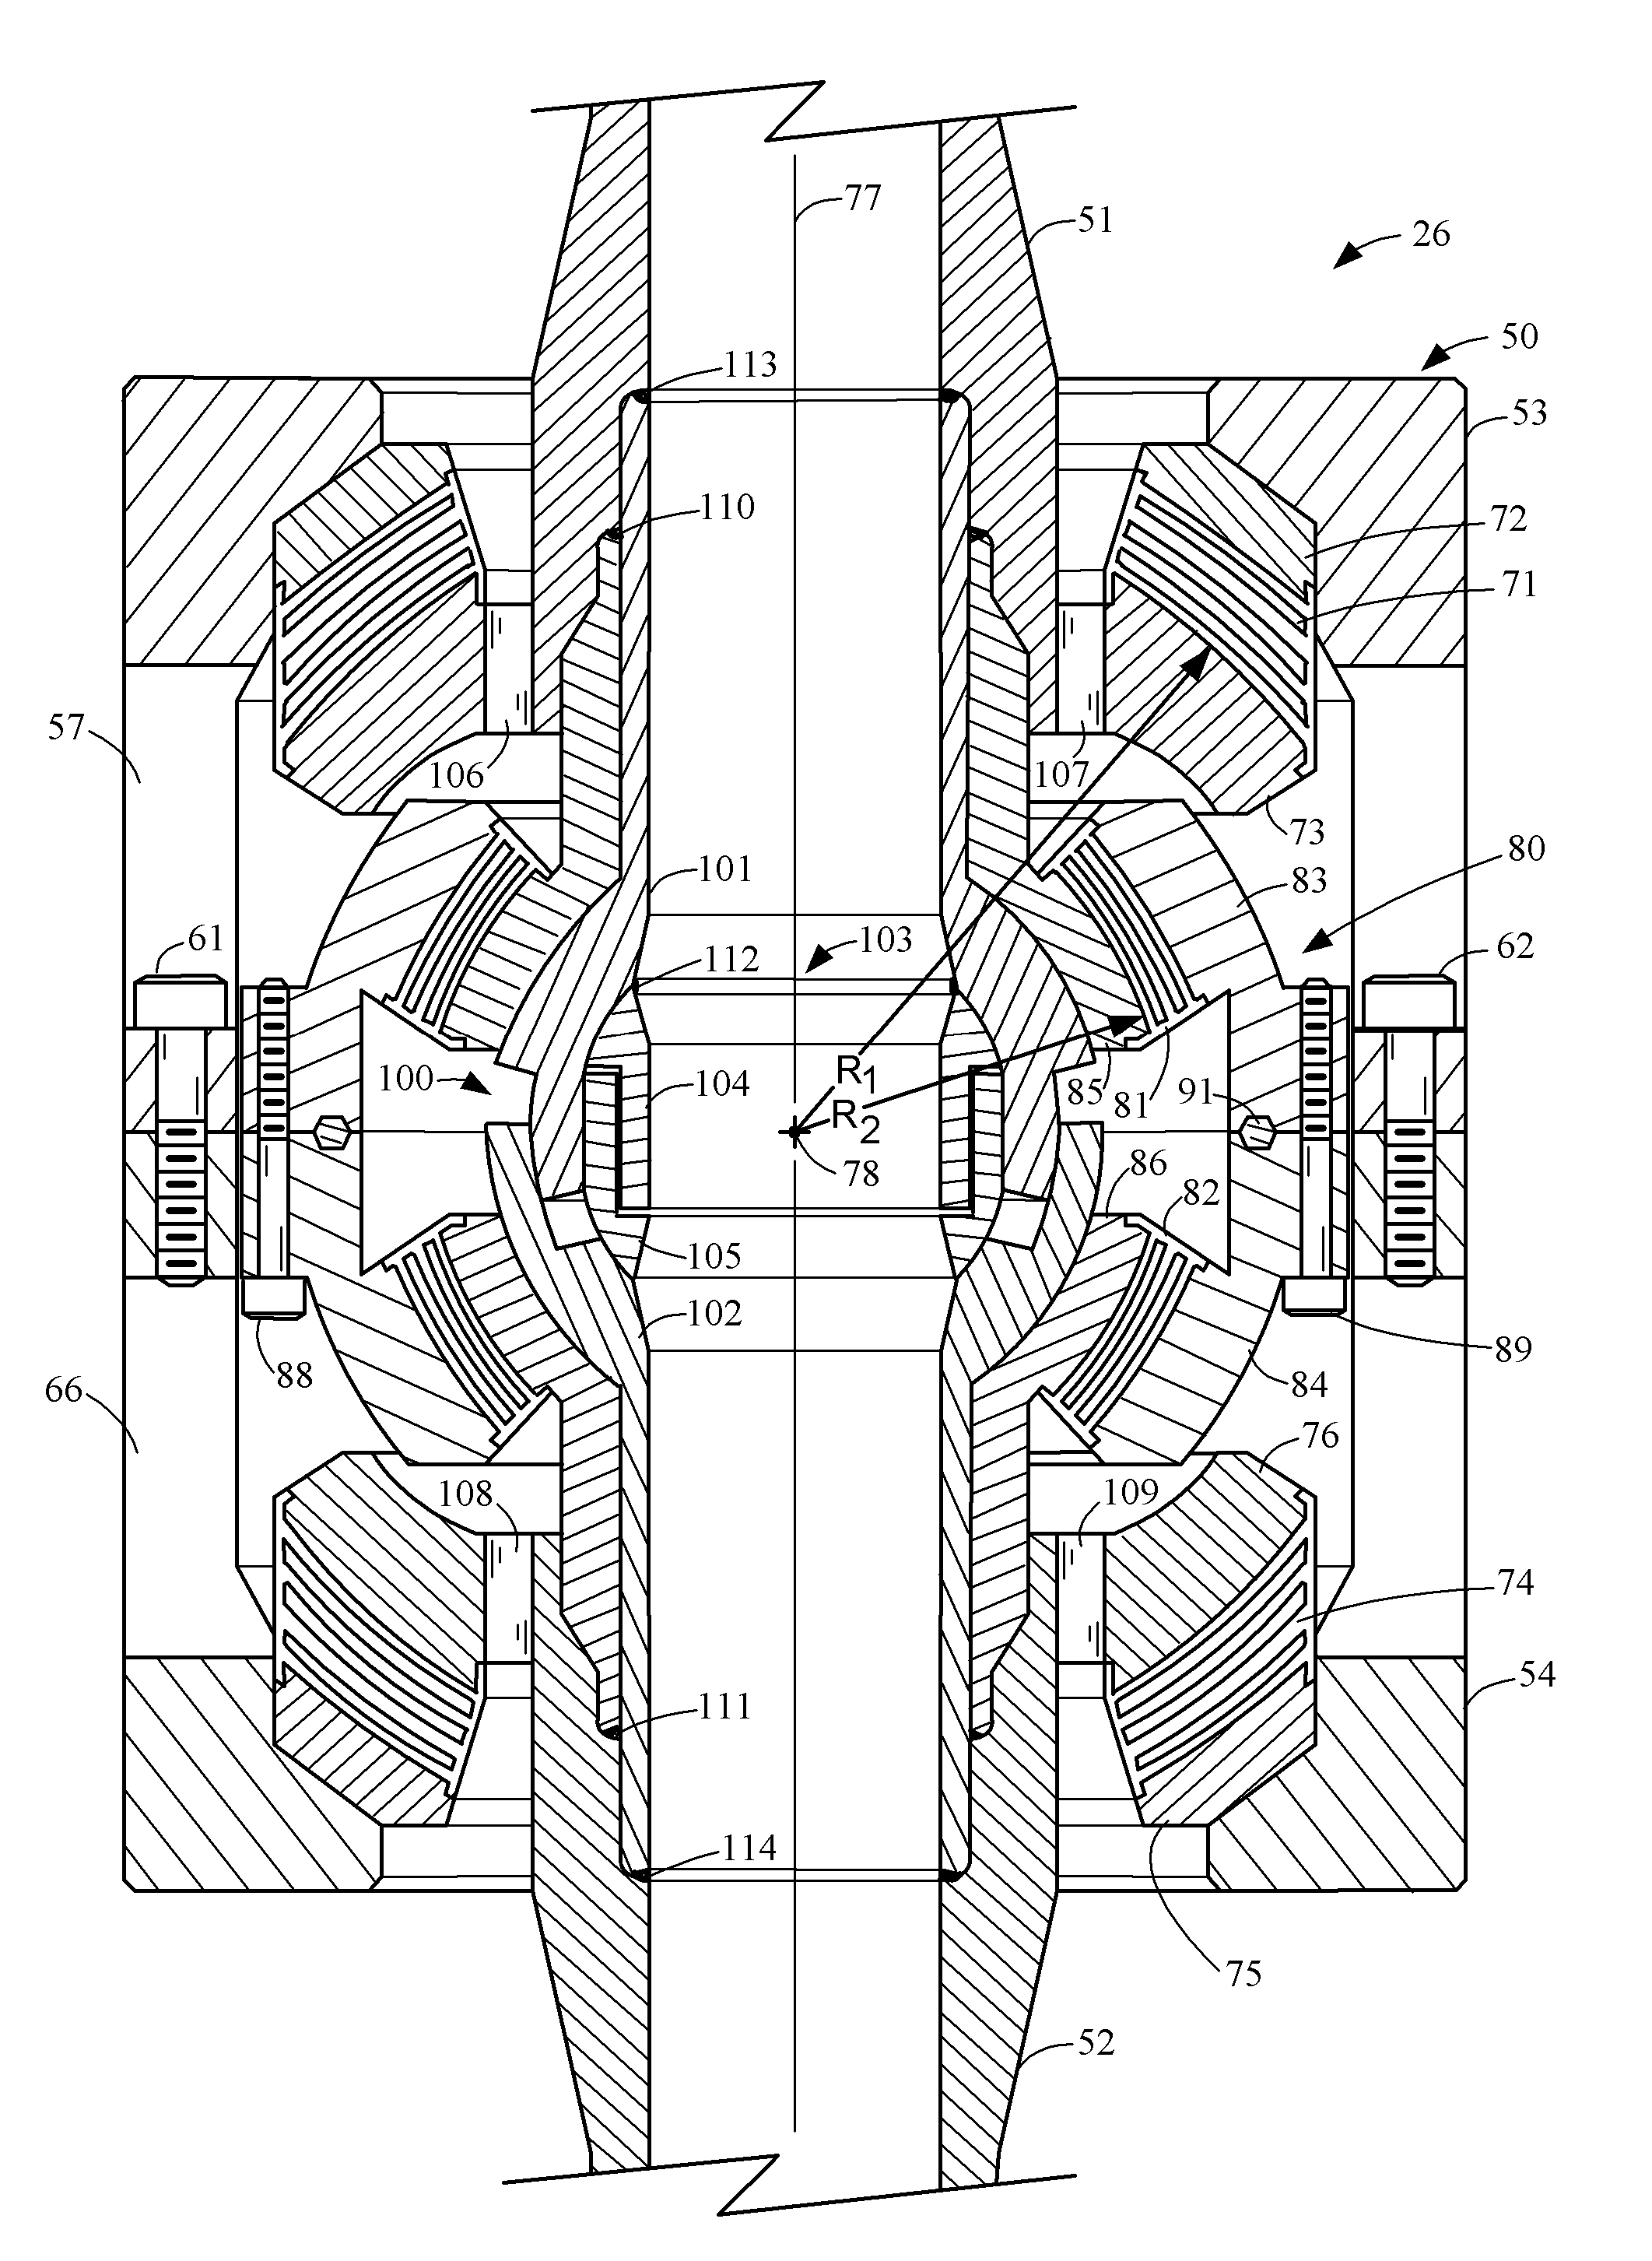 Double-ended flexible pipe joint having stacked co-axial primary and secondary annular elastomeric flex elements